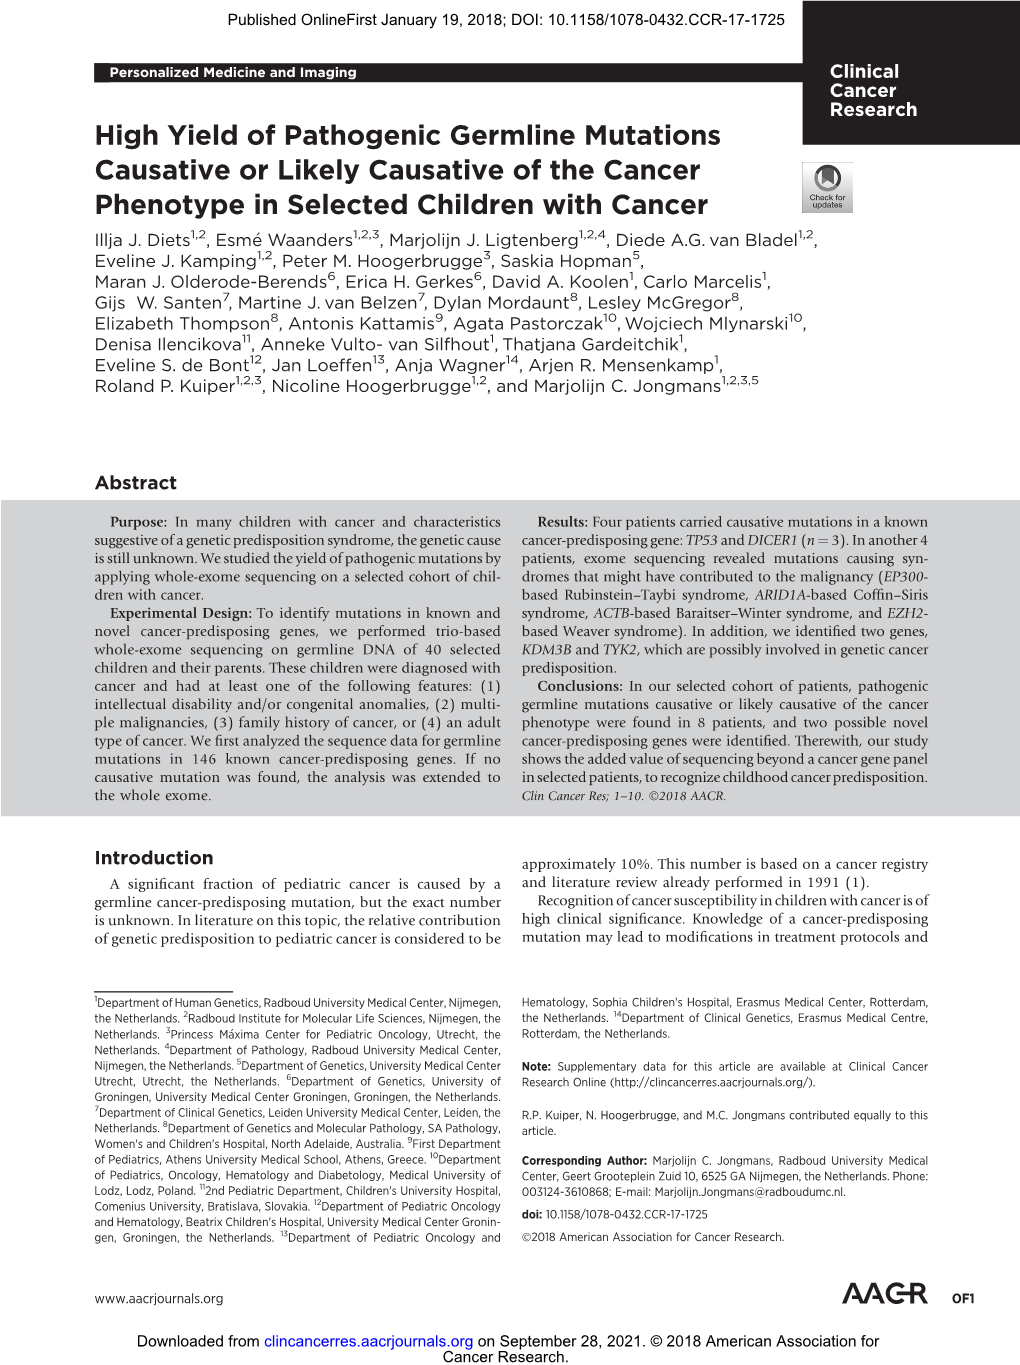 High Yield of Pathogenic Germline Mutations Causative Or Likely Causative of the Cancer Phenotype in Selected Children with Cancer Illja J